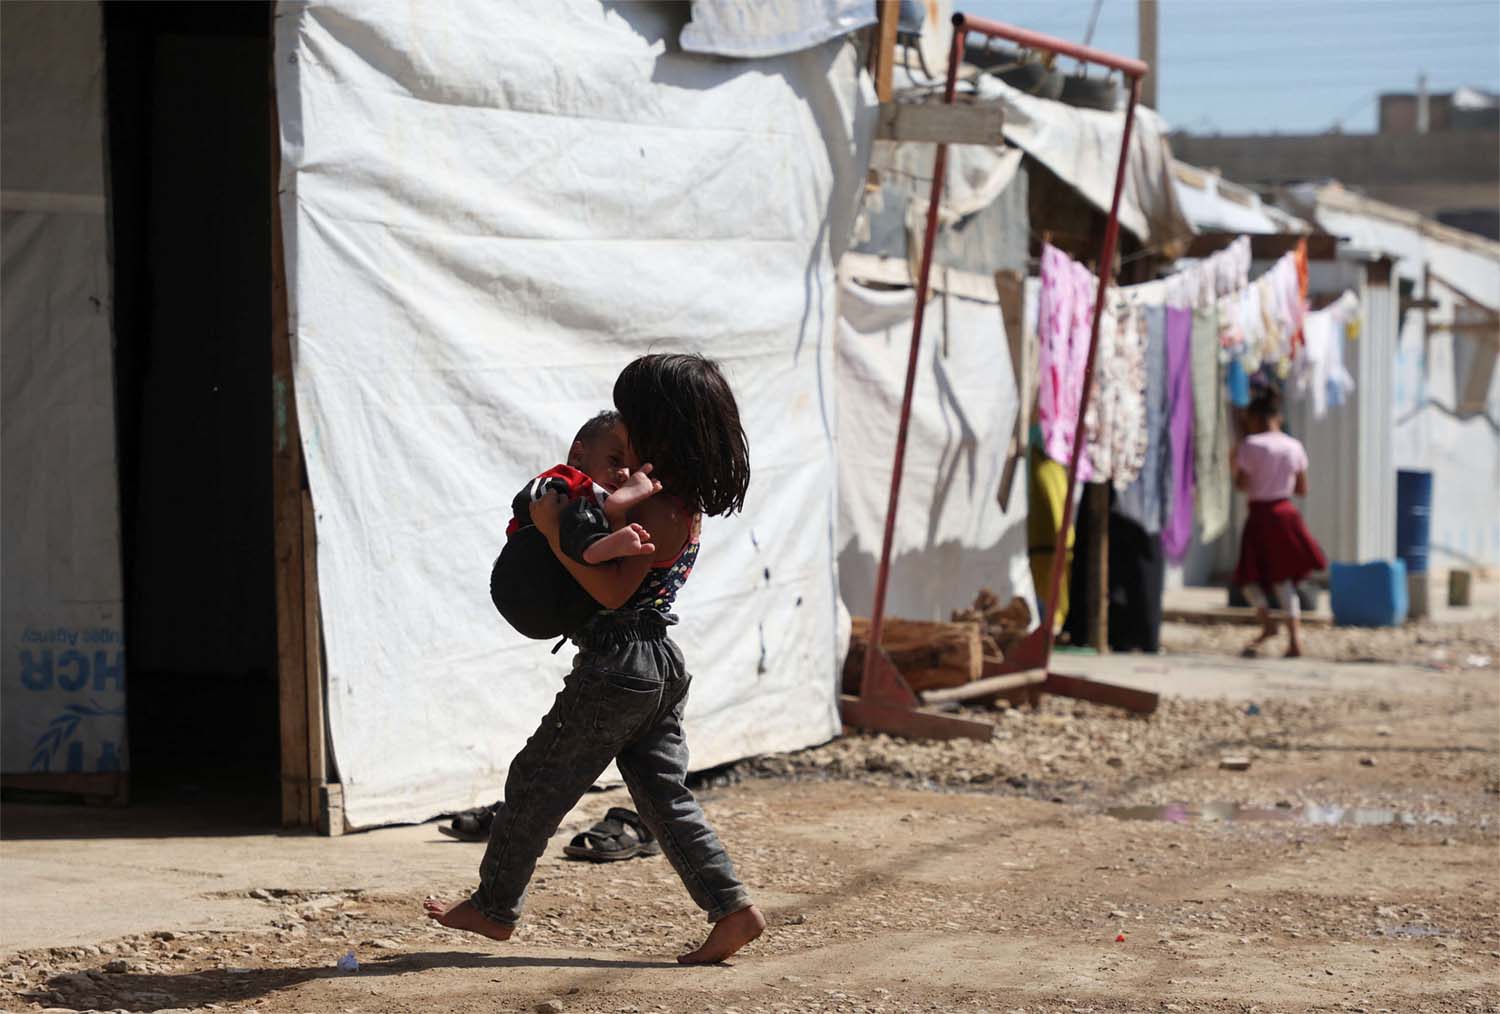 A Syrian refugee girl carries a child as she walks past tents at an informal camp in Bekaa Valley